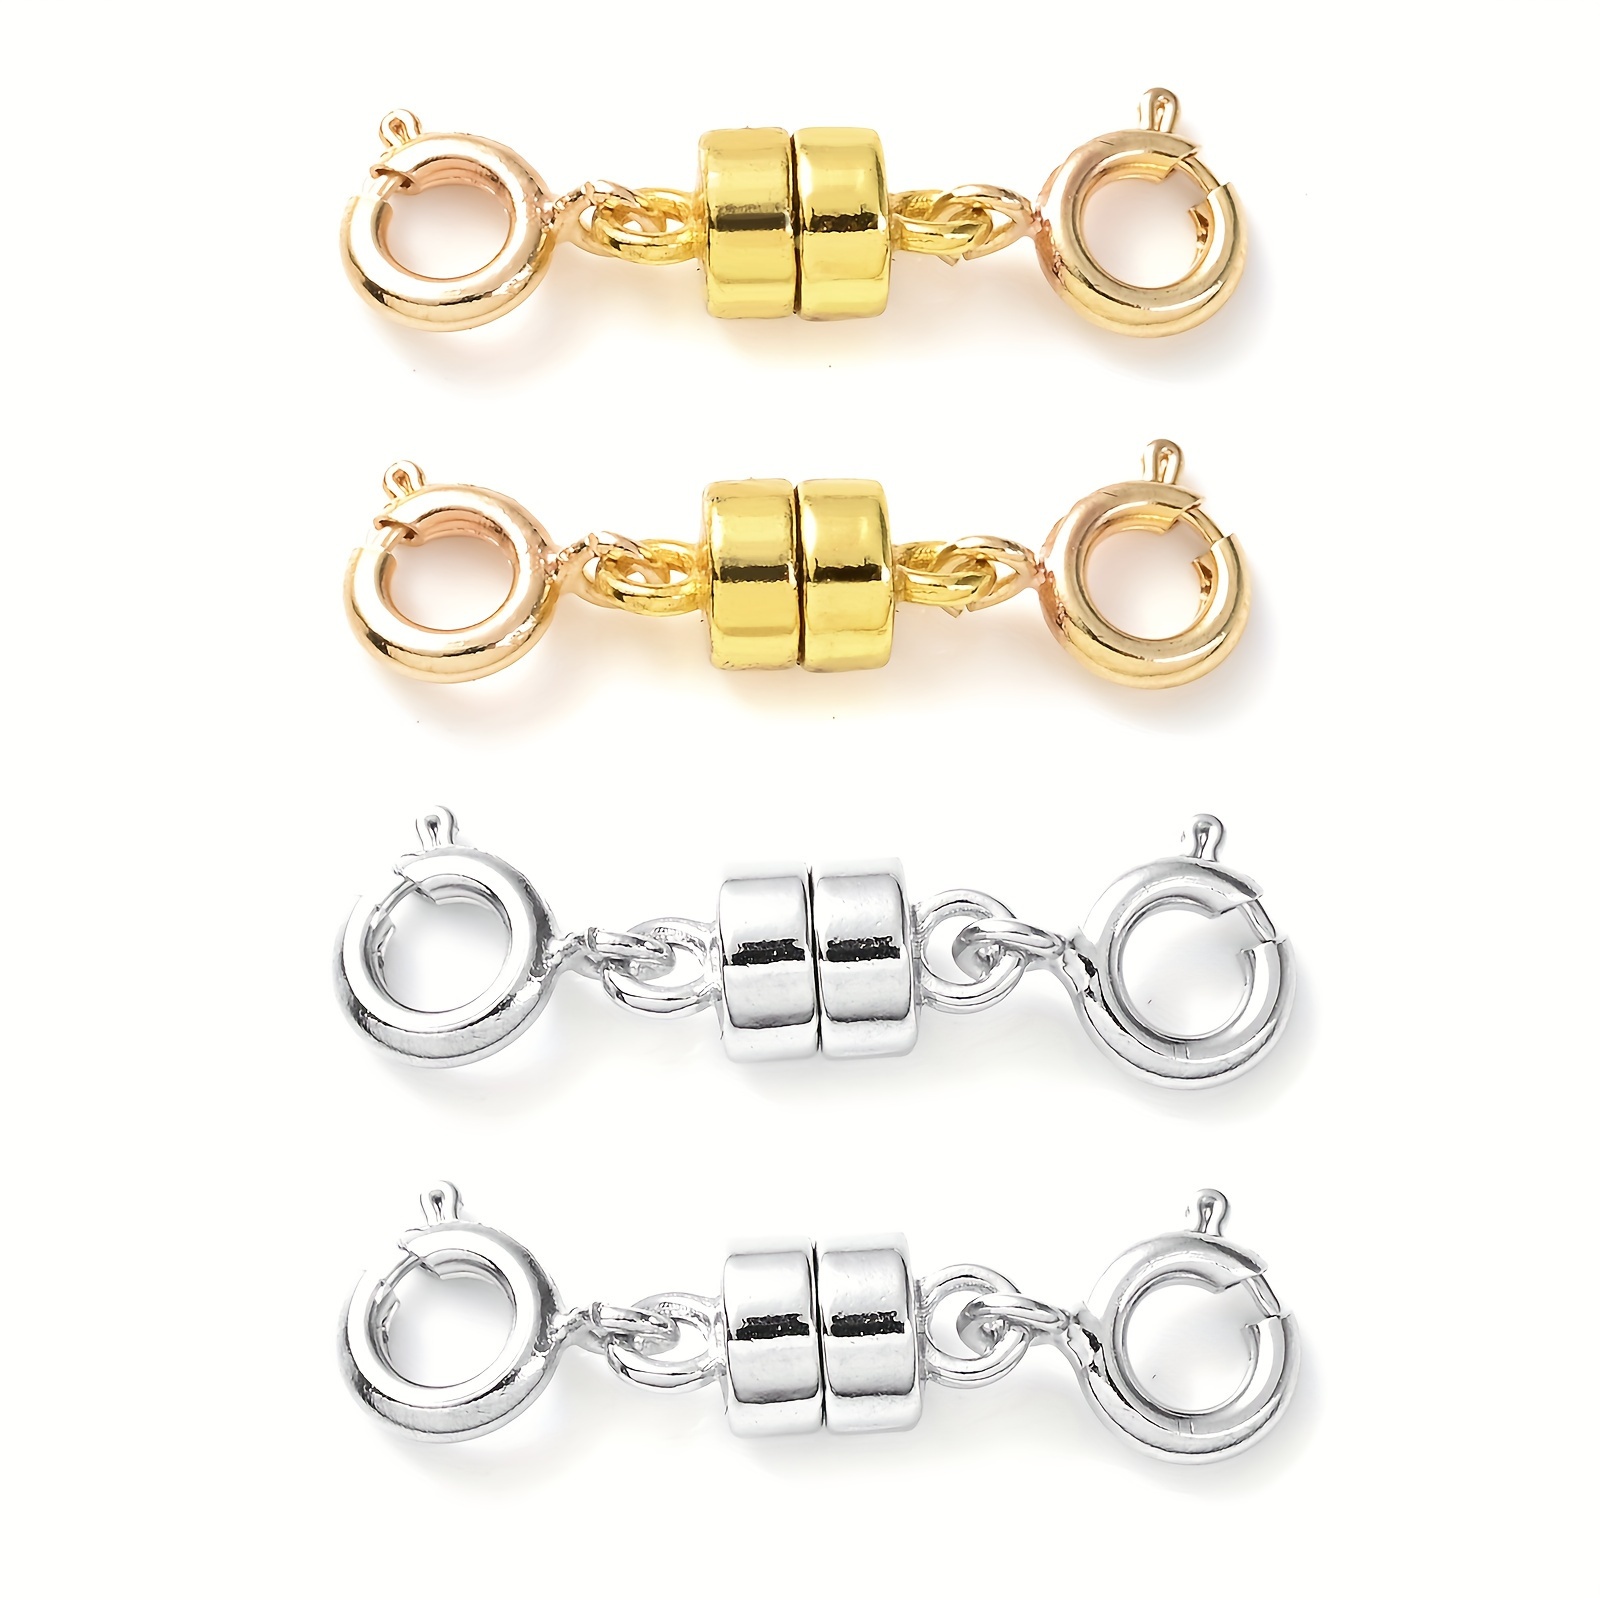 5 Pairs Of 10pcs/set Of New Spherical Magnetic Clasp Bracelet Connector  Buckle Necklace Connection Clasp With Alloy Lobster Clasp Magnetic  Connector C